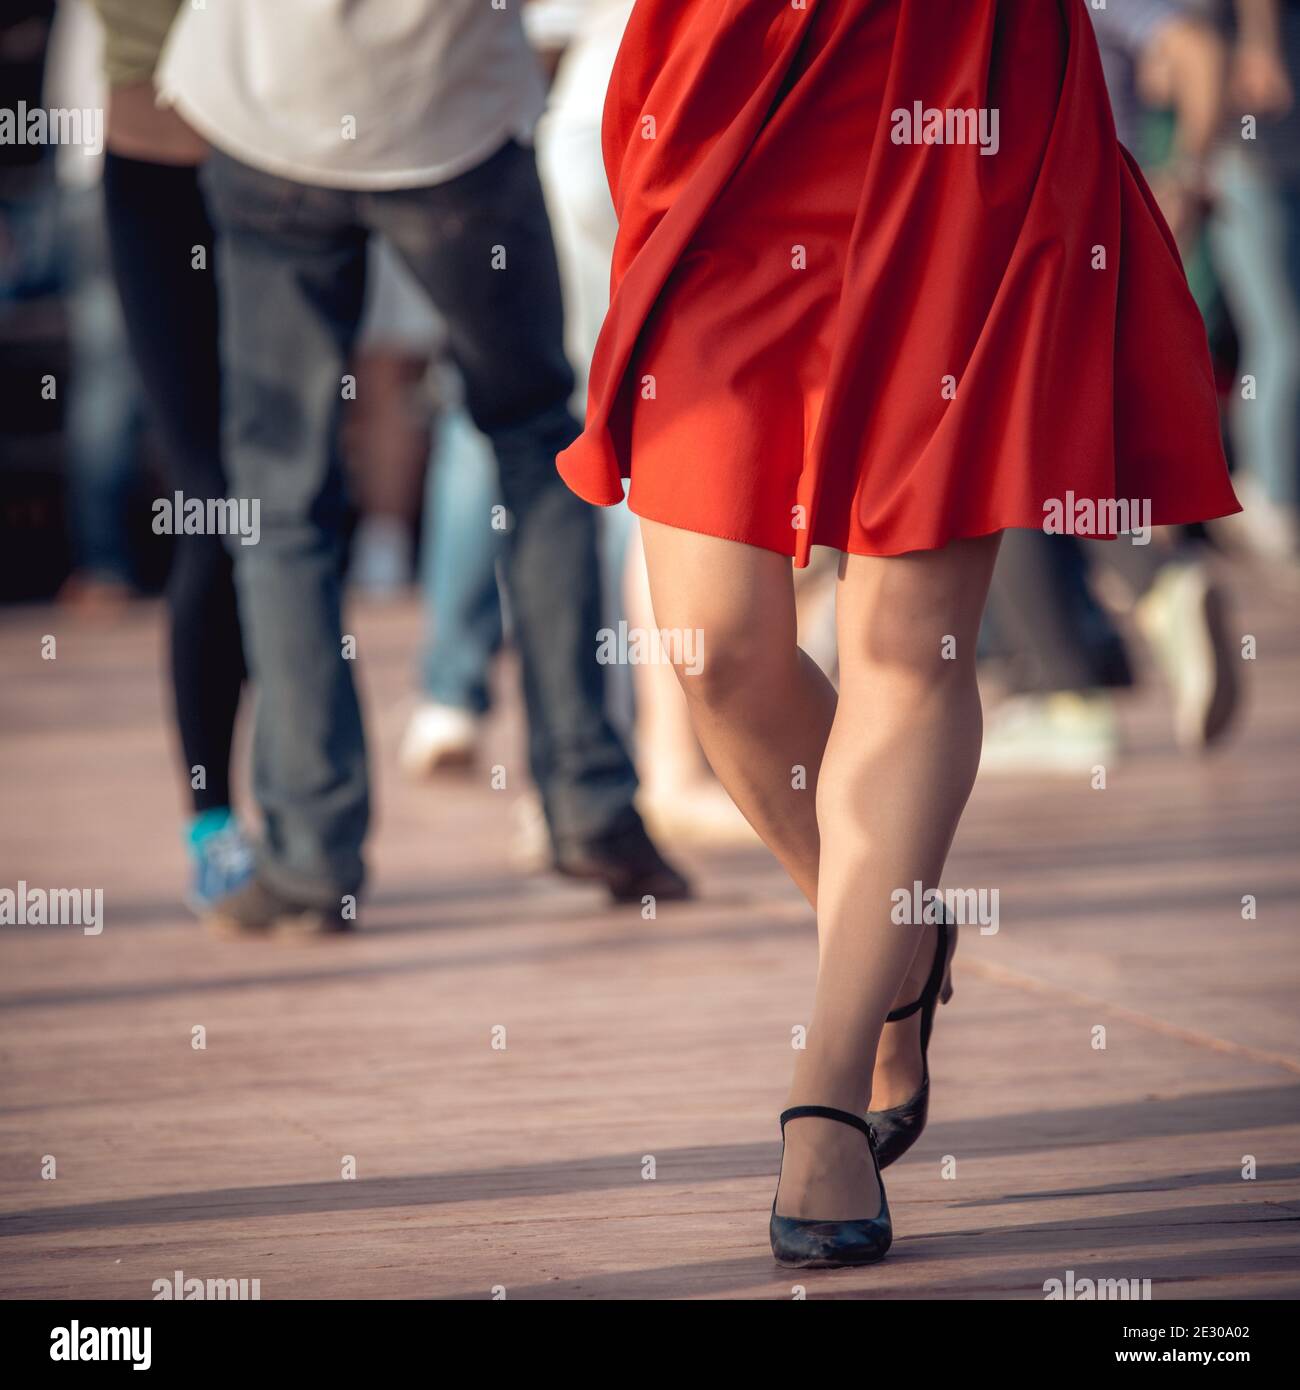 people are dancing outdoors in the park at sunny day. beautiful female feet in dancing shoes in the foreground and red skirt Stock Photo